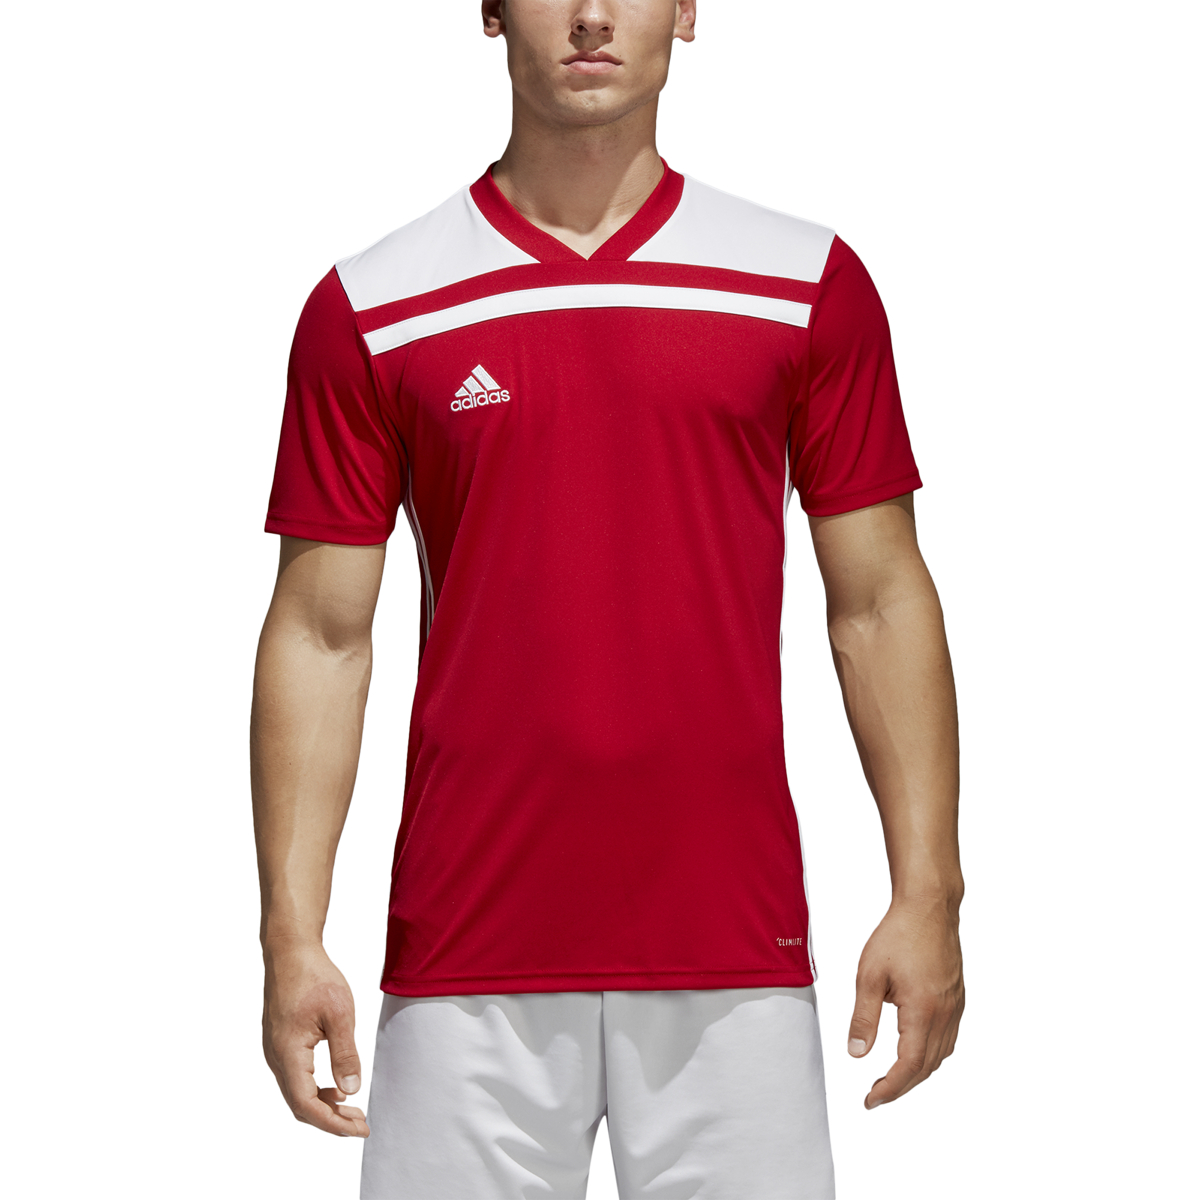 Adidas Mens Soccer Regista 18 Jersey Adidas - Ships Directly From Adidas - image 1 of 6